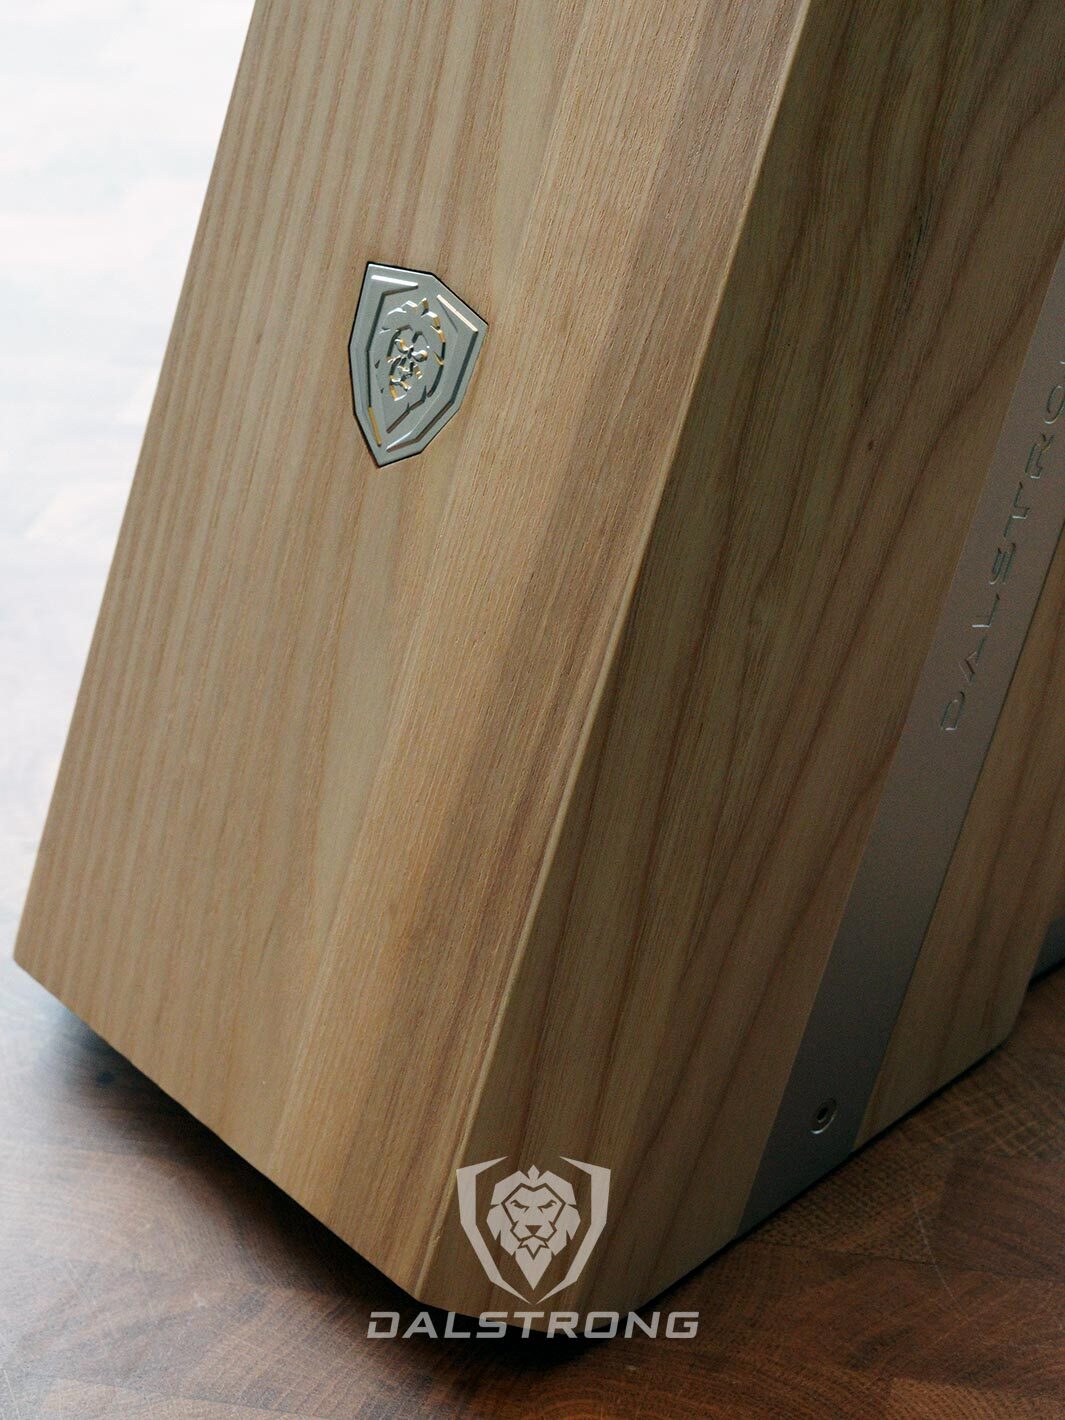 Dalstrong 18 slots universal knife block featuring it's wooden block with dalstrong logo.